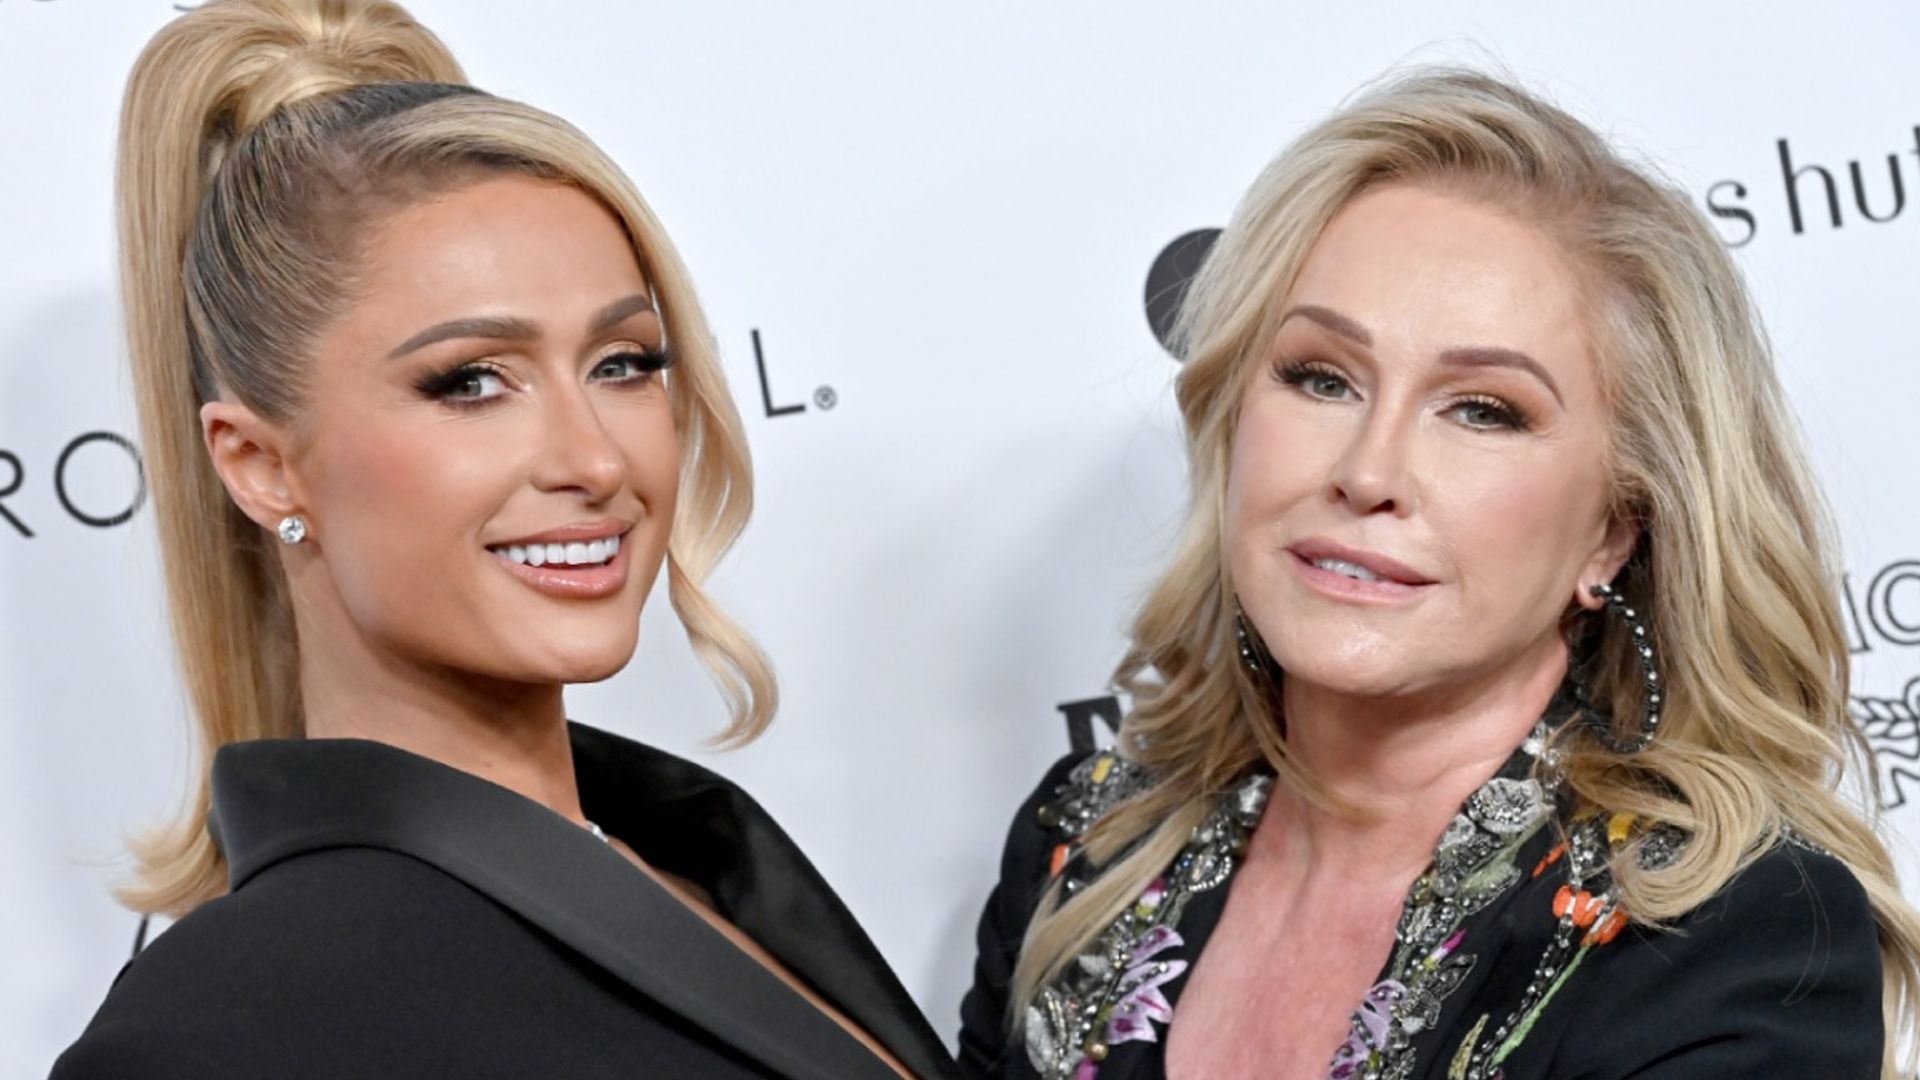 Exclusive: Kathy Hilton opens up on being a 'hands-on' grandmother